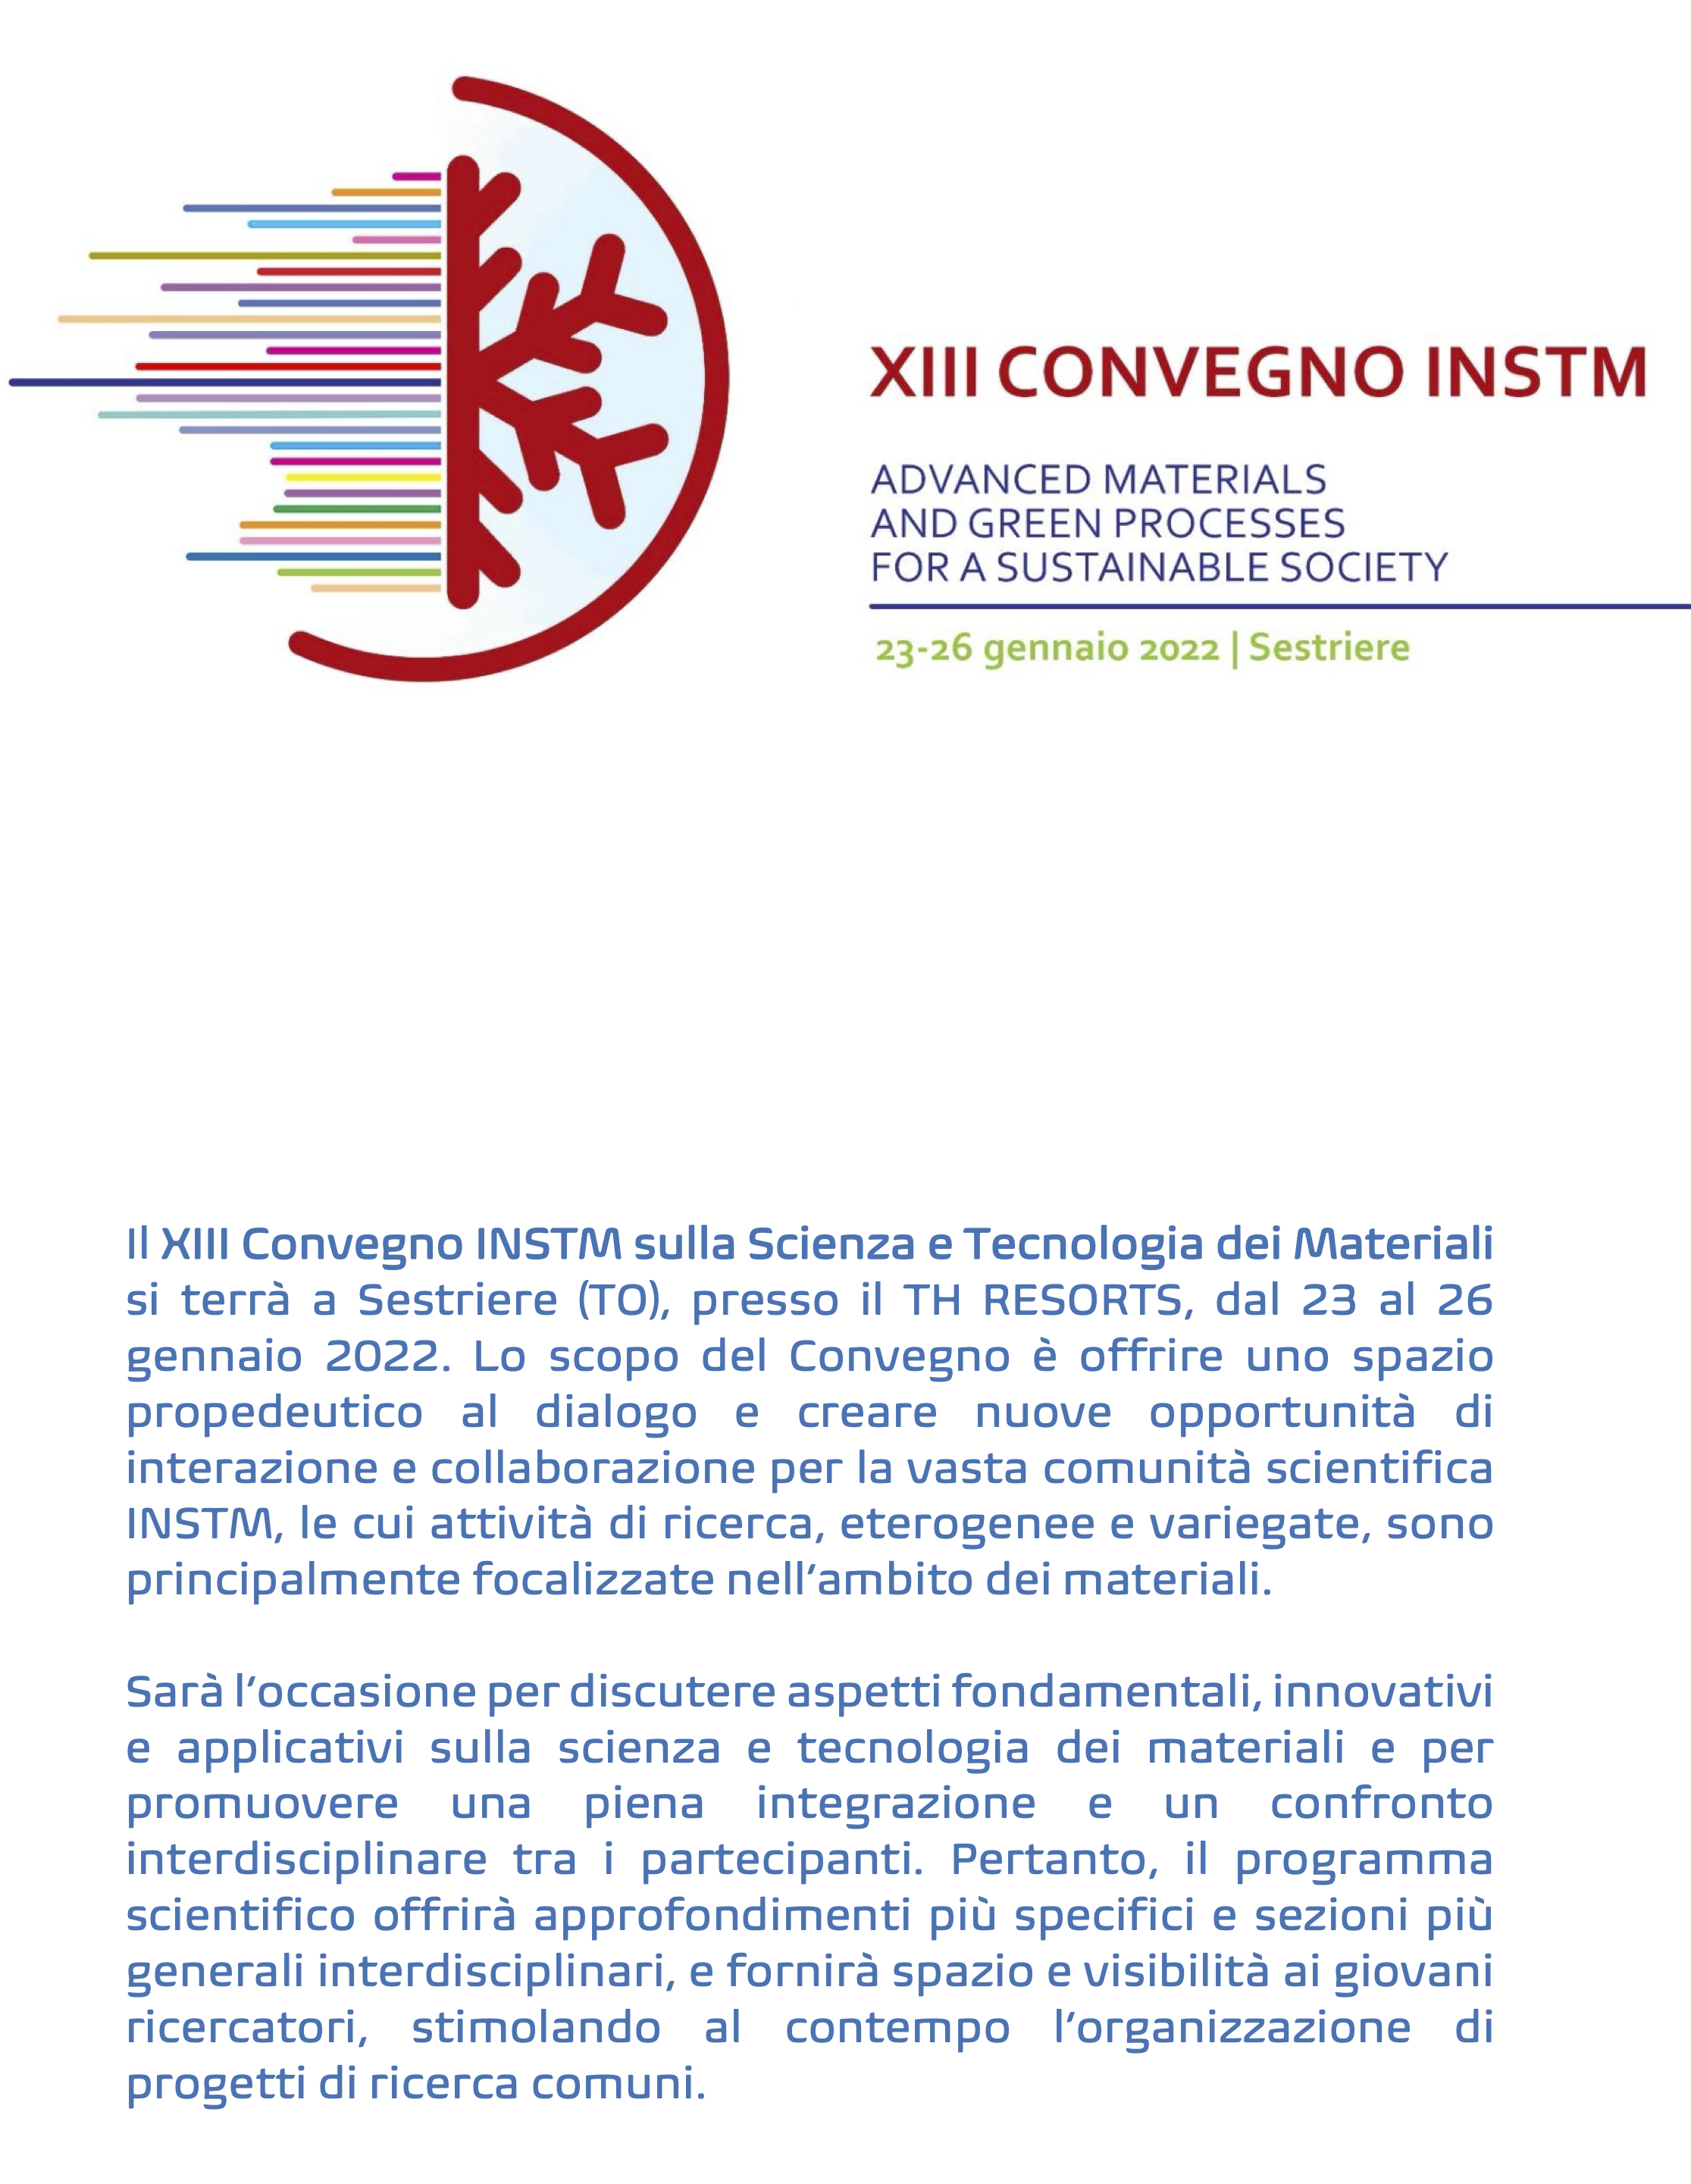 XIII Convegno INSTM poster see link